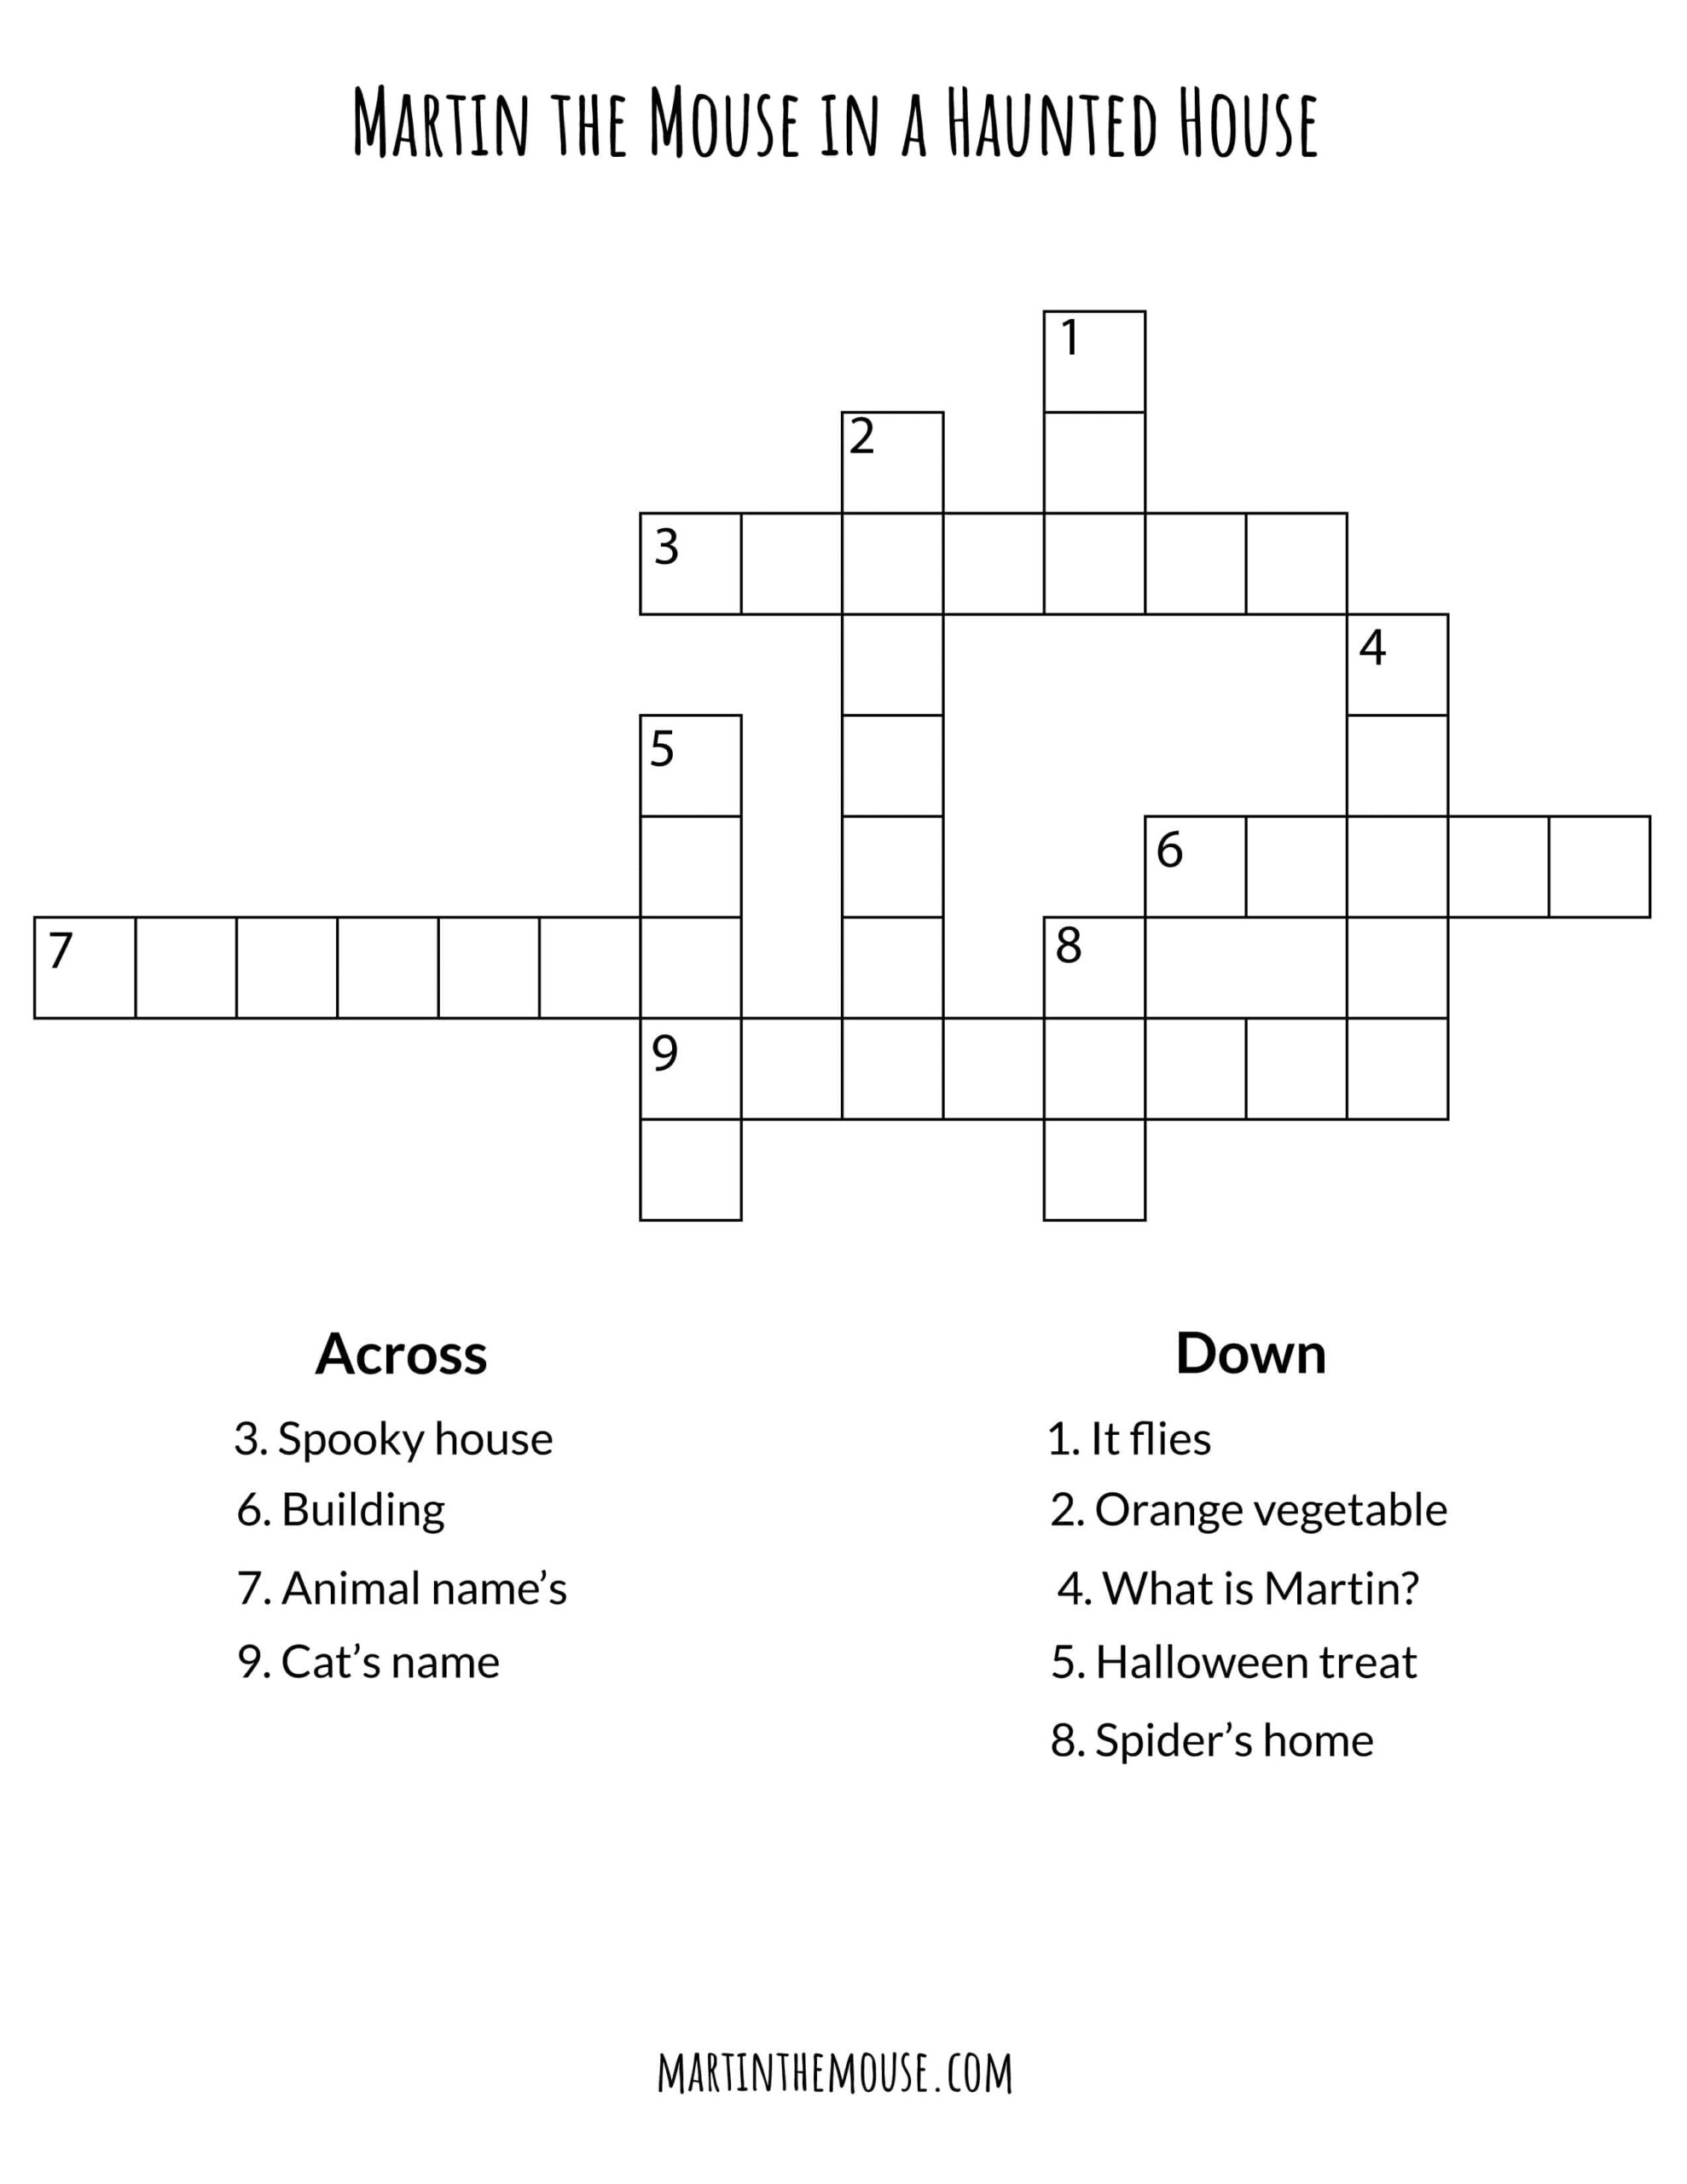 creepy sound in a haunted house crossword